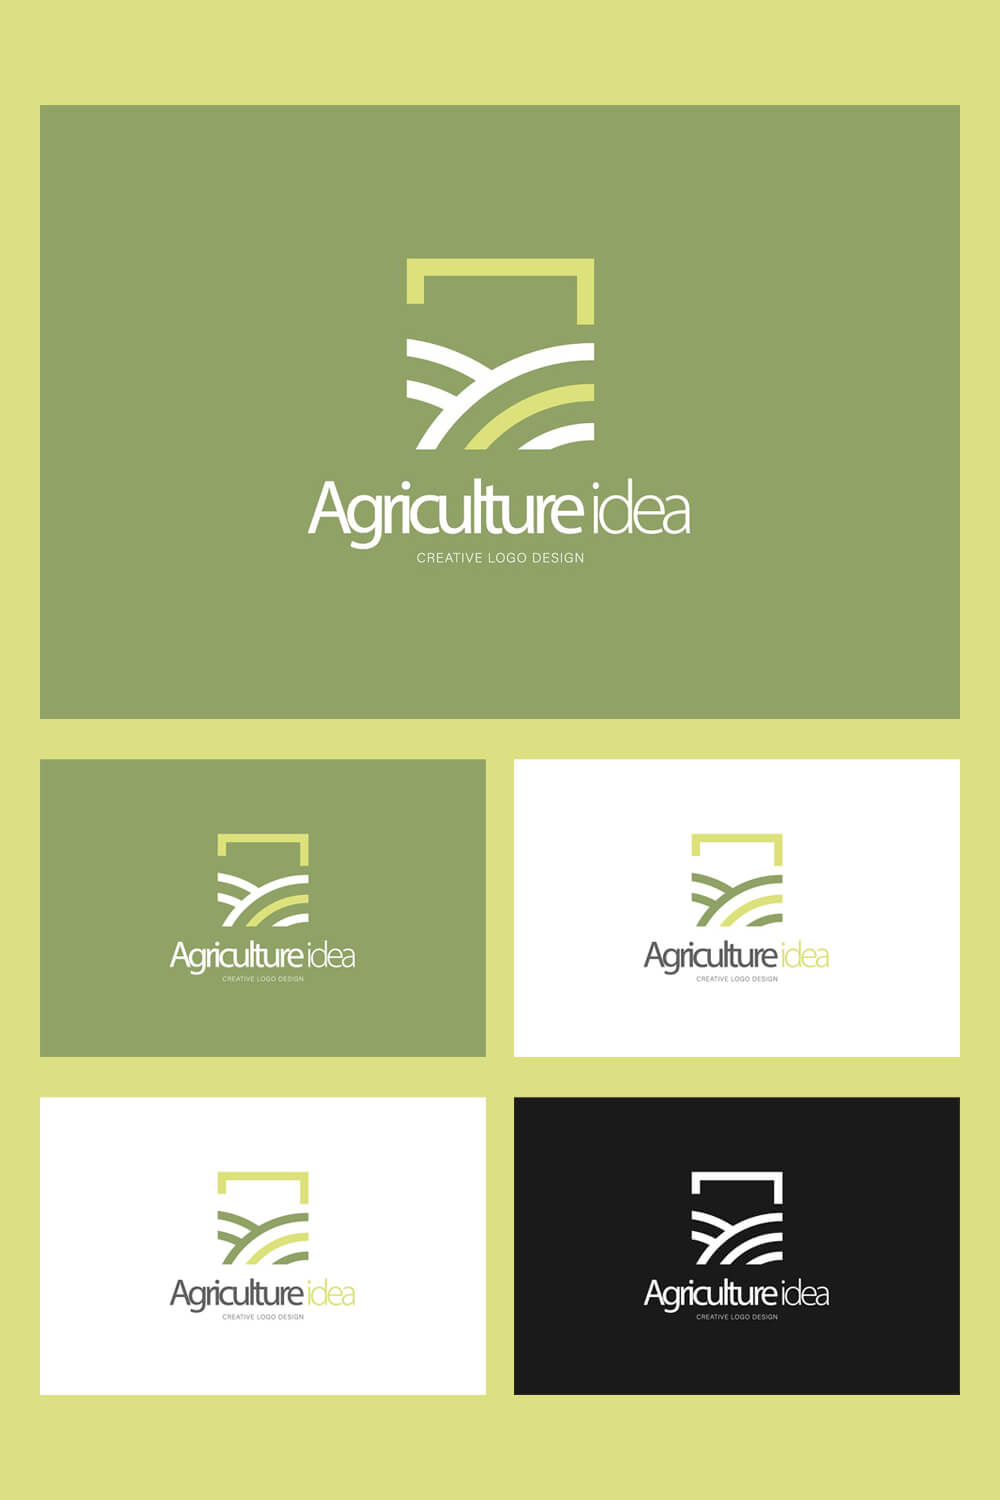 Four colored logos of agriculture idea on white, green, black backgrounds.